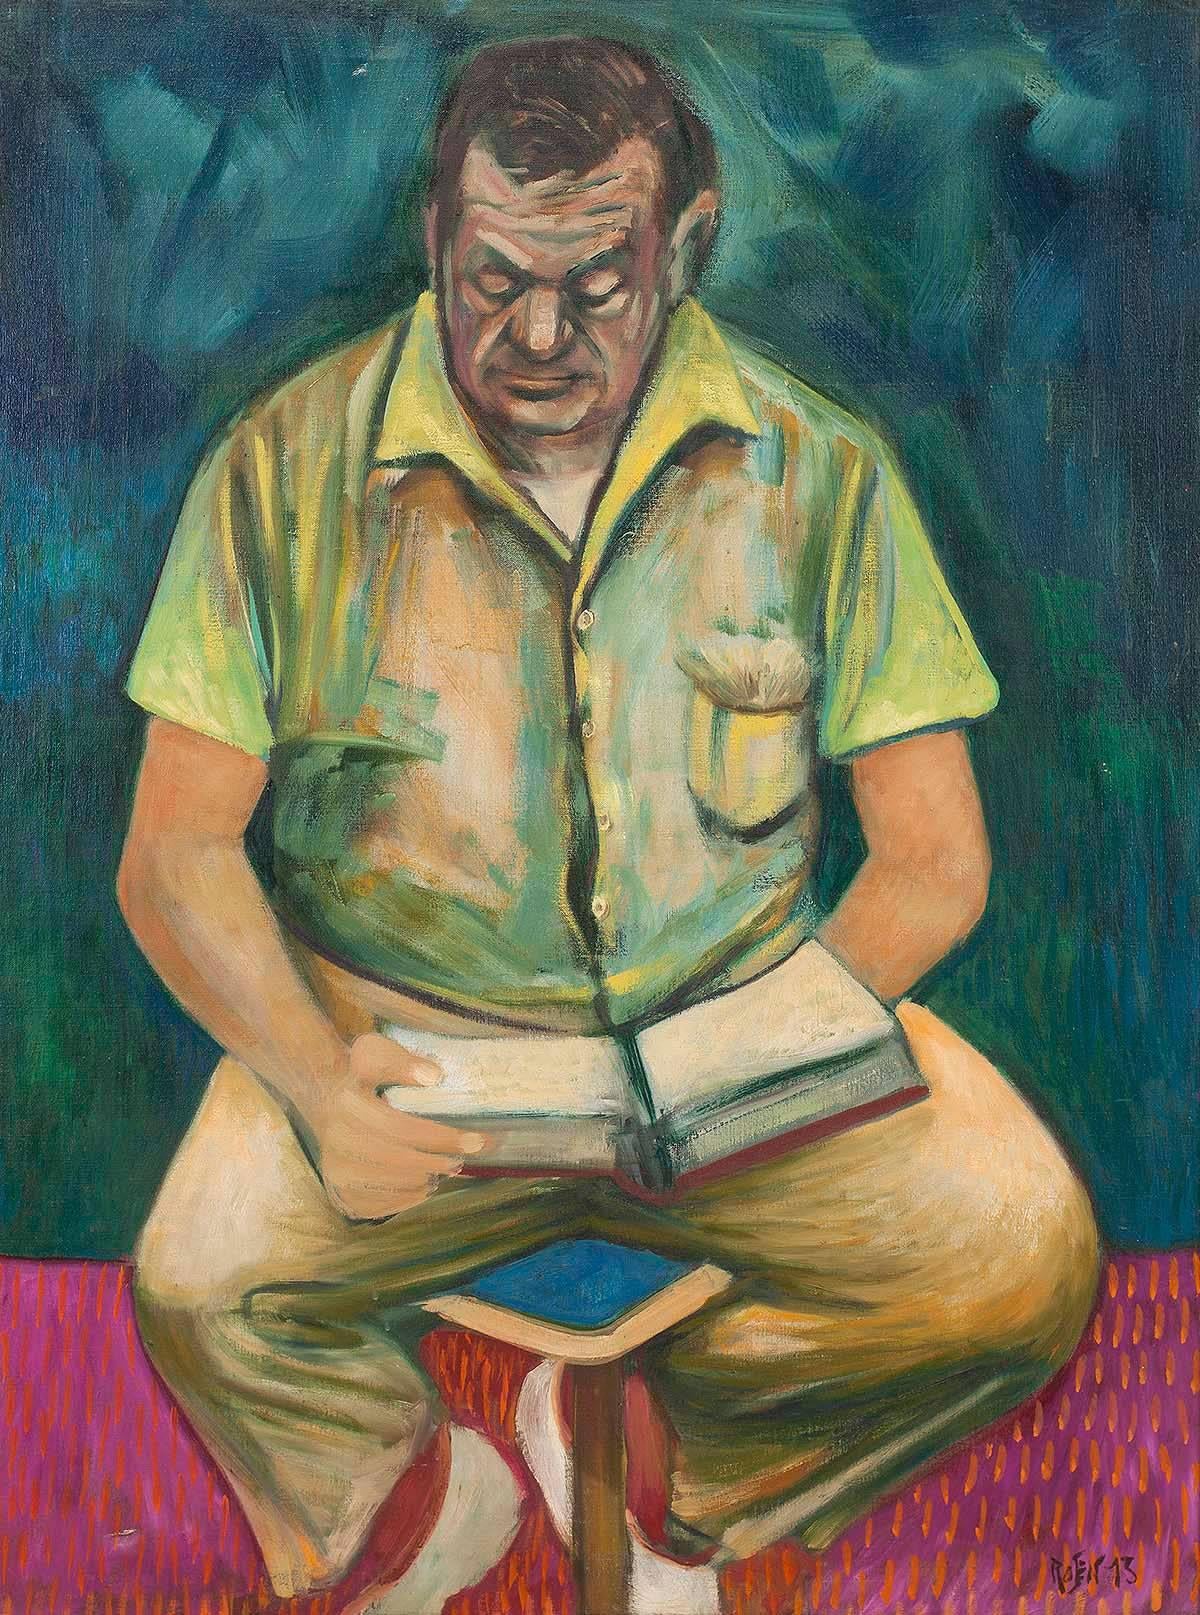 Middle Age Aint That Bad. (Retiree Reading a Book) - Painting by David Rosen (b.1912)